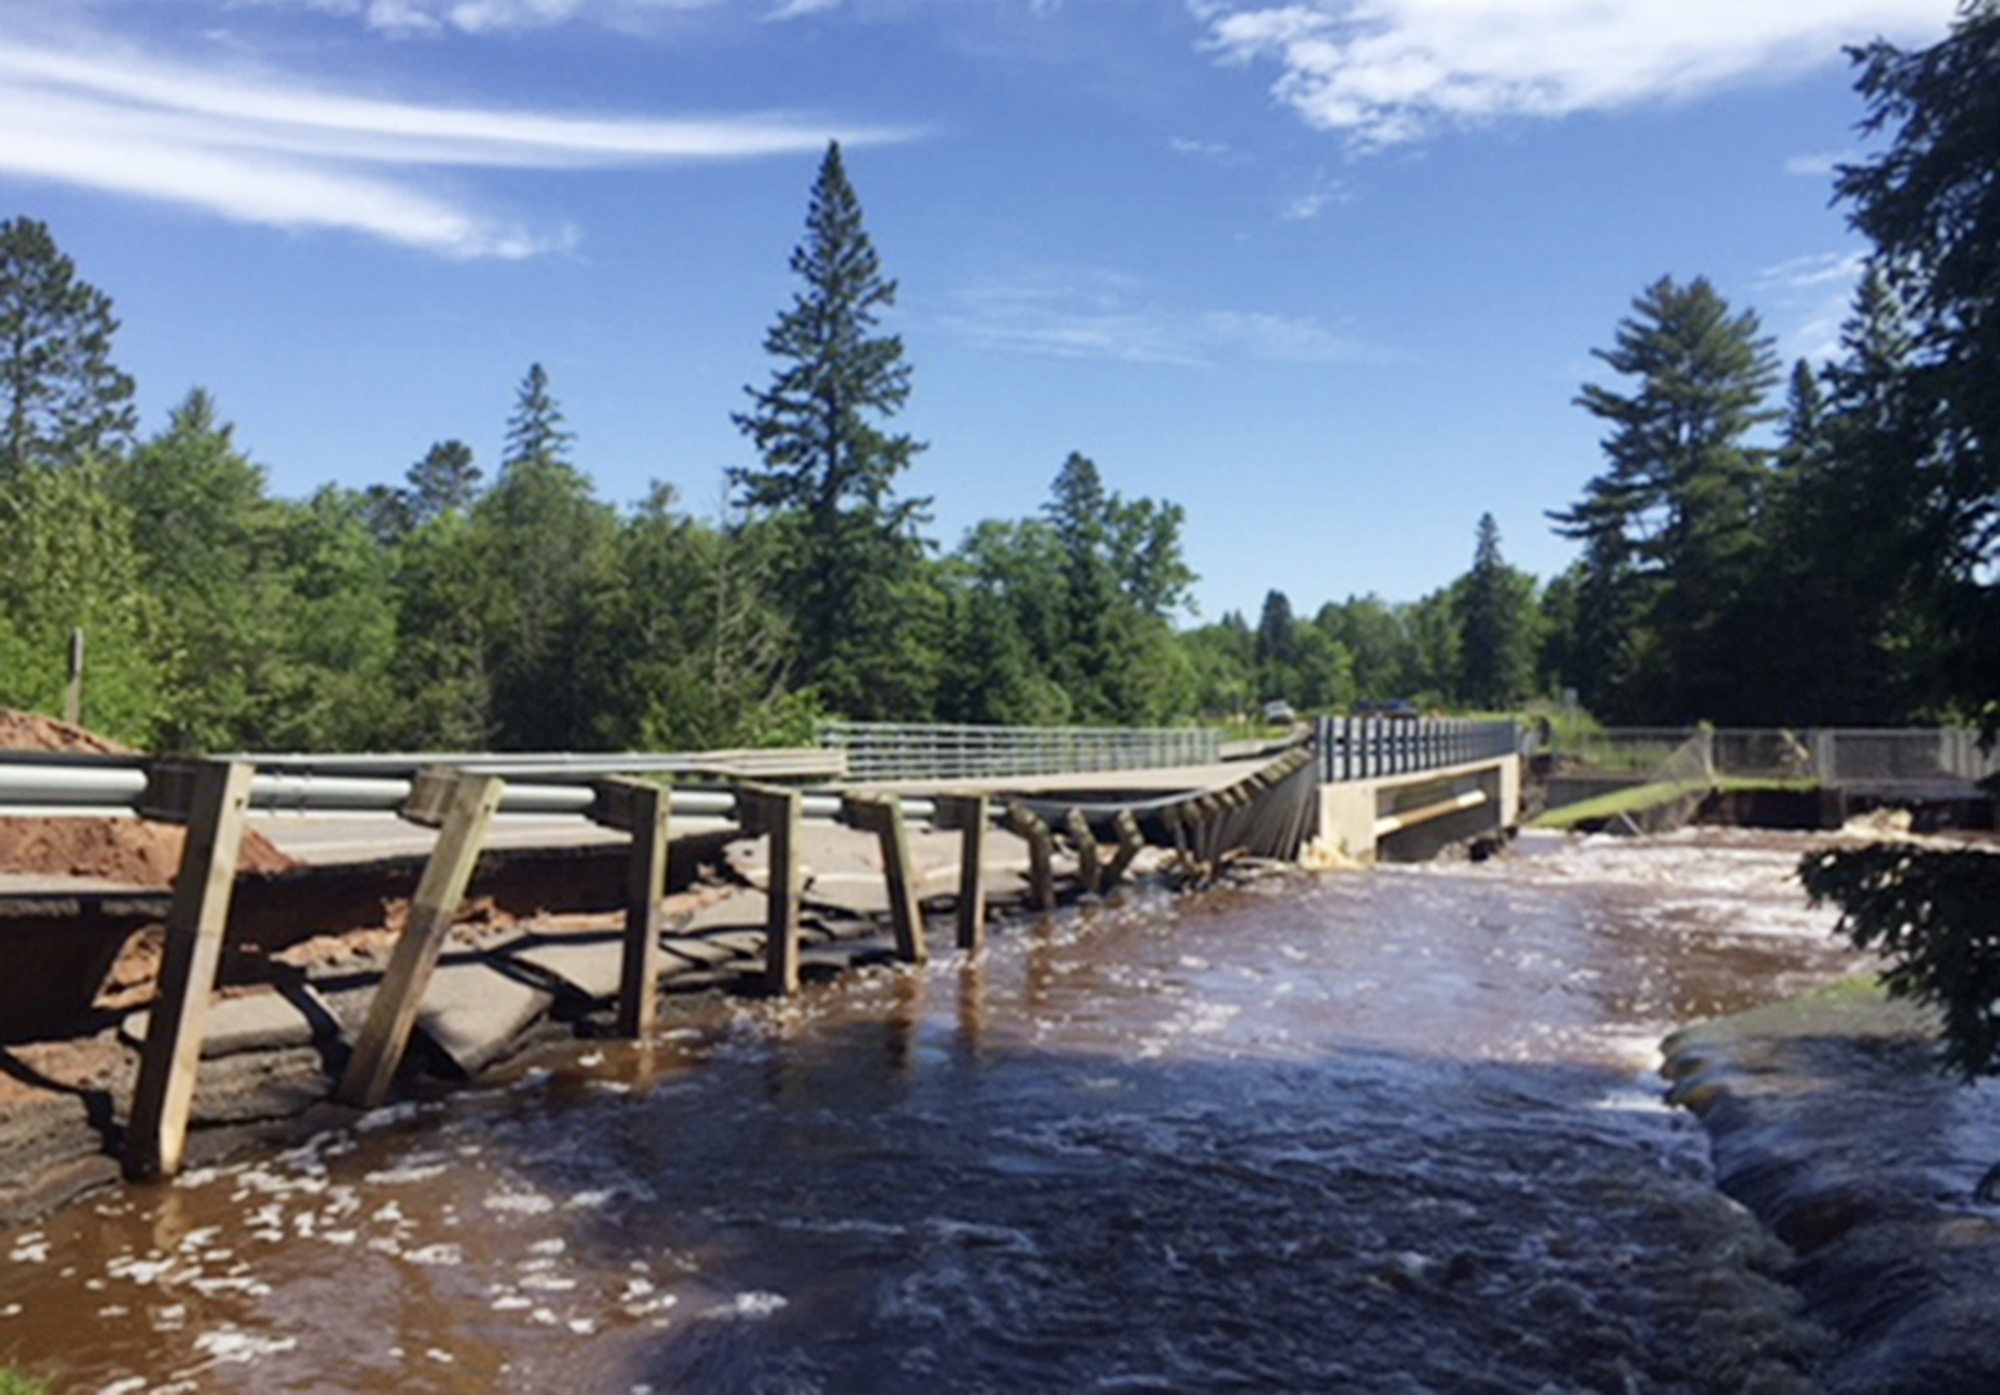 PHOTO: This photo provided by the Wisconsin Department of Transportation shows Wisconsin Highway 35 over Black River damaged from flash flooding in Pattison State Park in Douglas County, Wis., June 18, 2018.